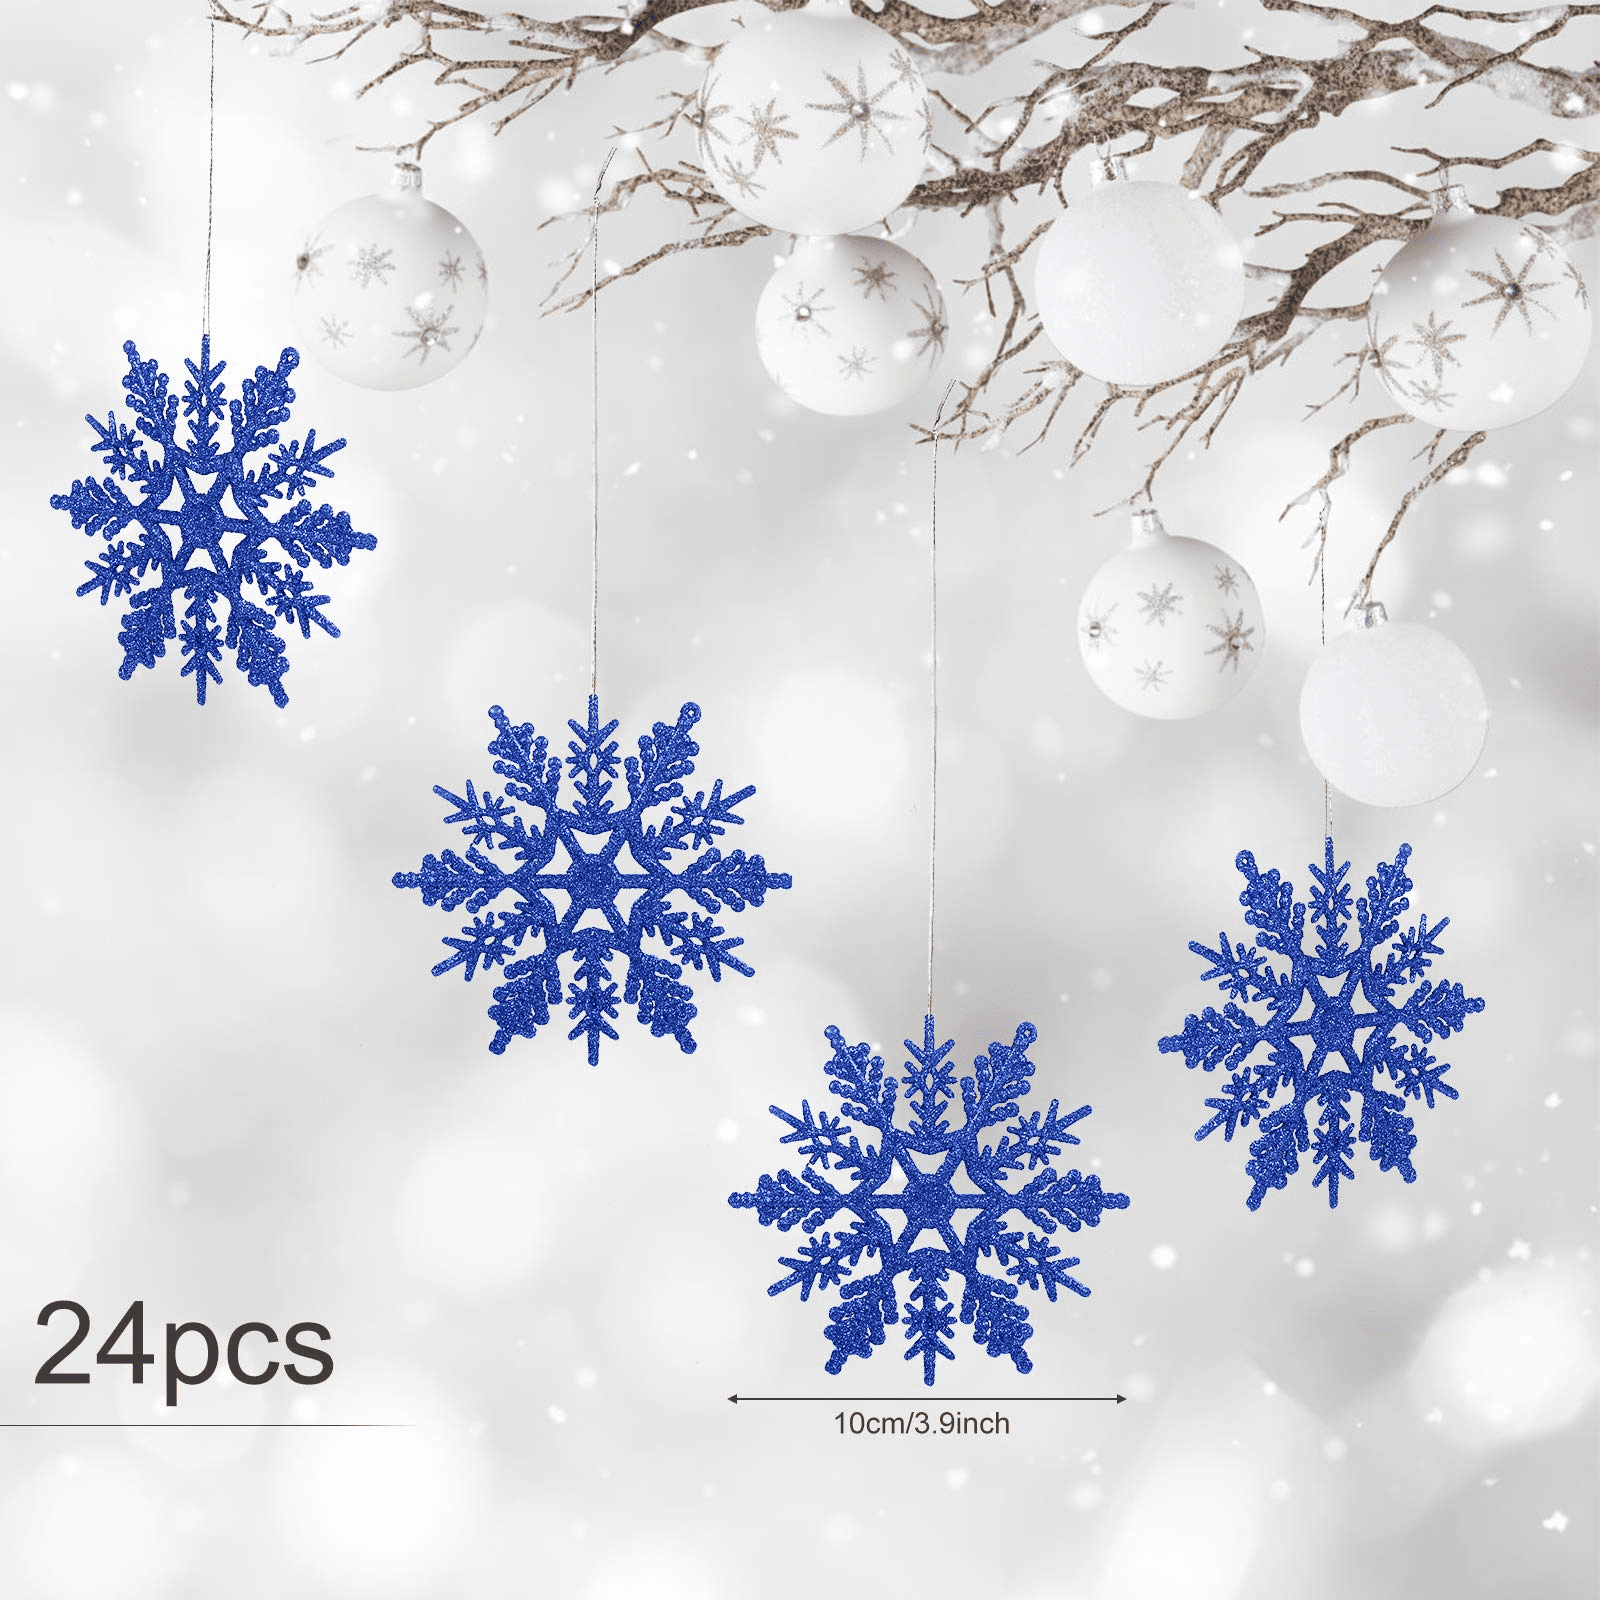 Naler Plastic Snowflake Ornaments, 24pcs White Snowflake Ornaments Glitter  Snowflake Ornaments with Hanging String for Christmas Tree Window Ceiling